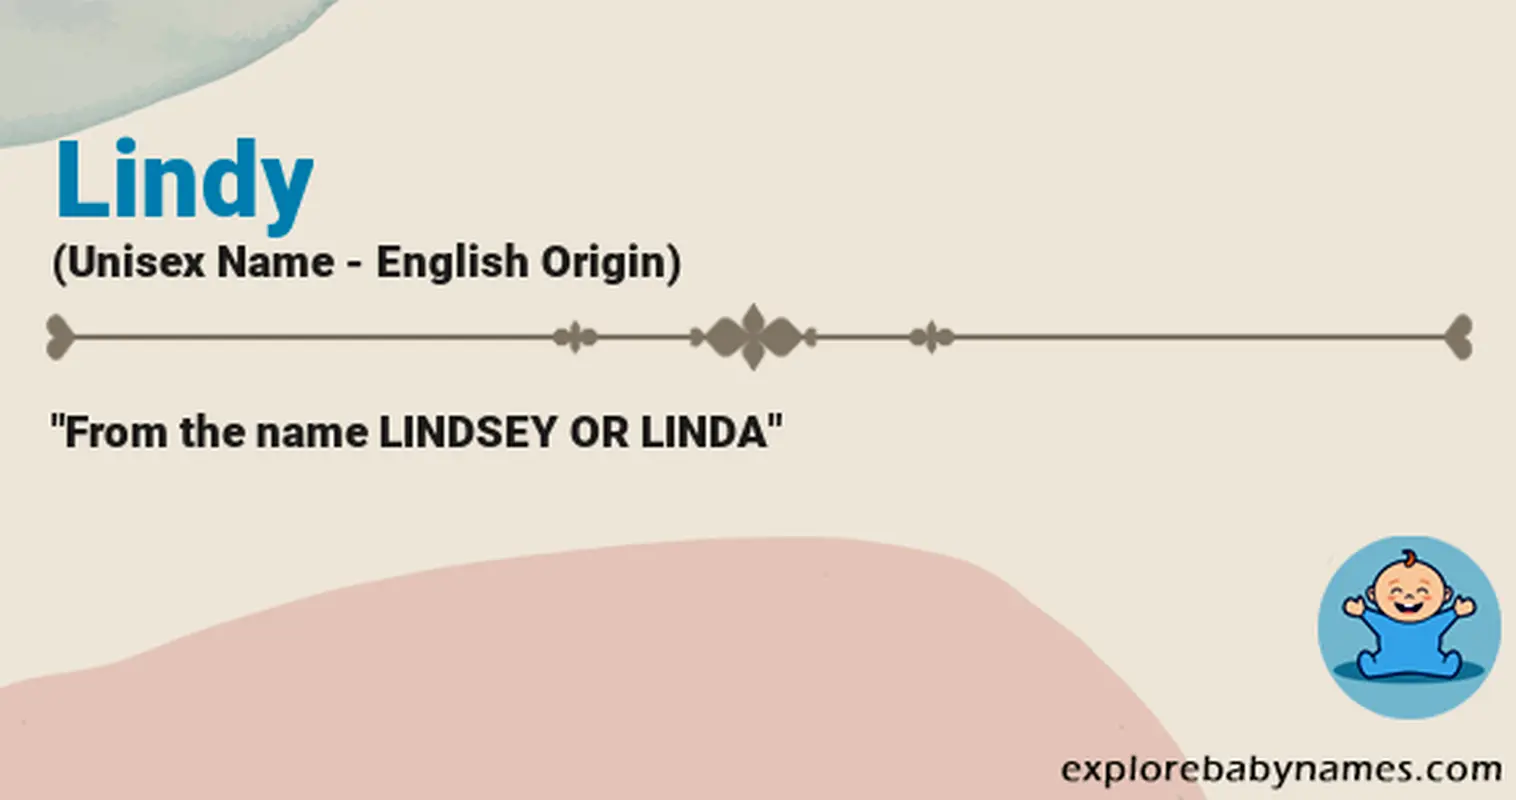 Meaning of Lindy